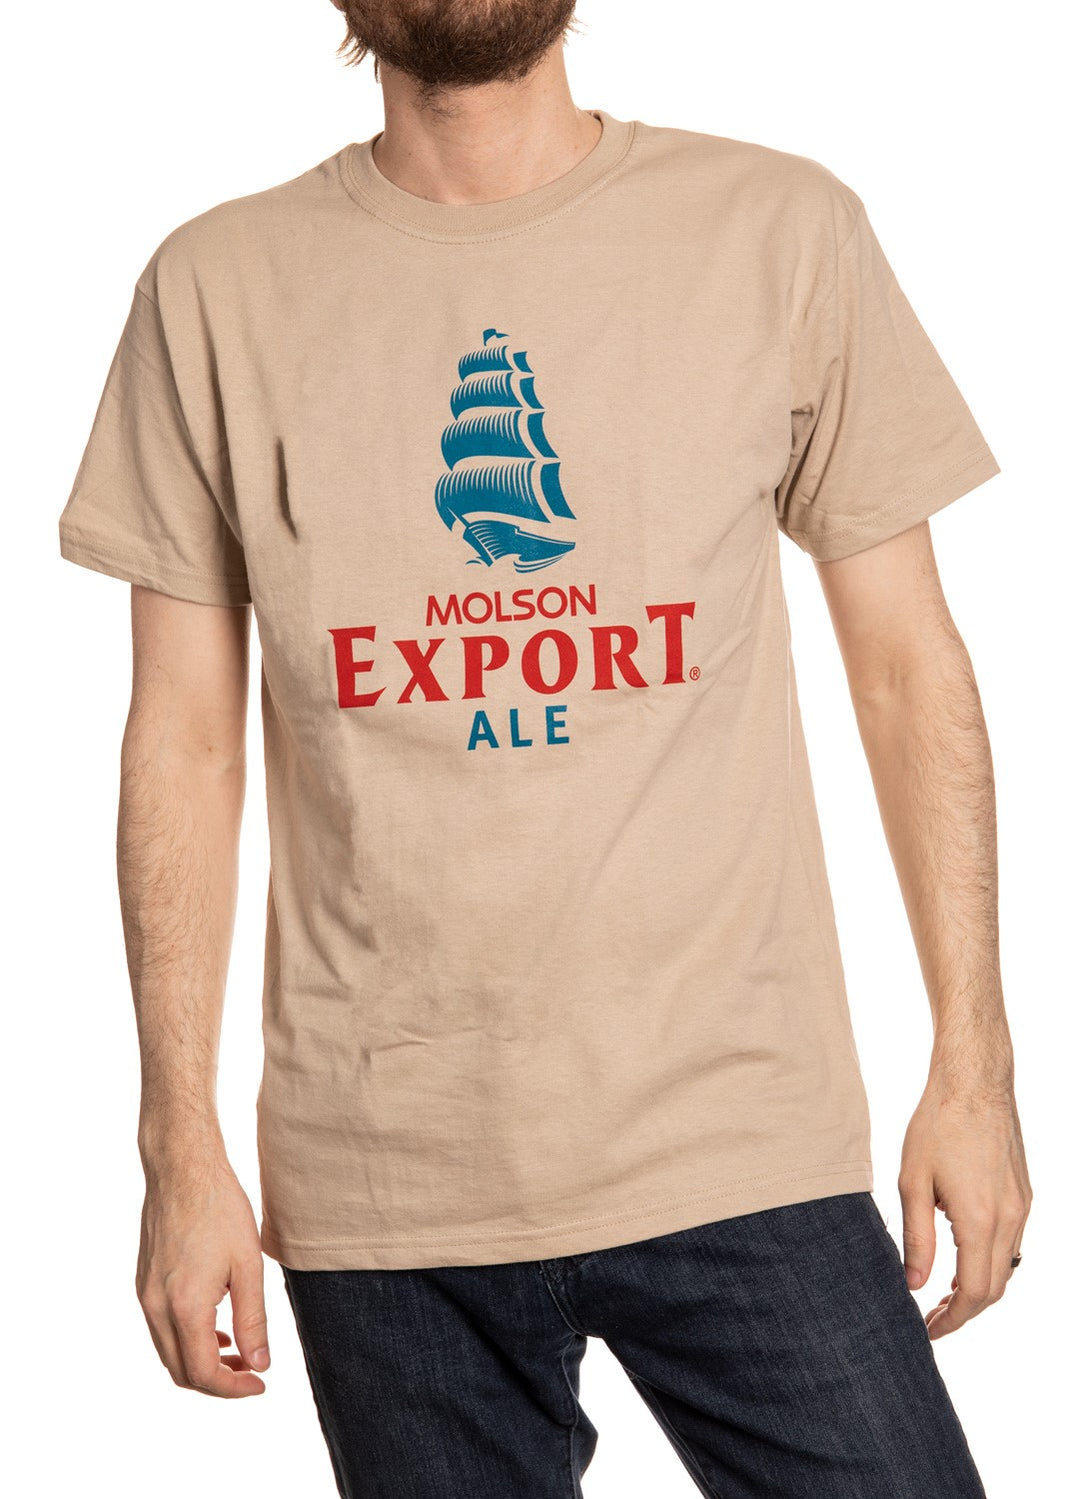 Molson Export T-Shirt in Tan Front VIew